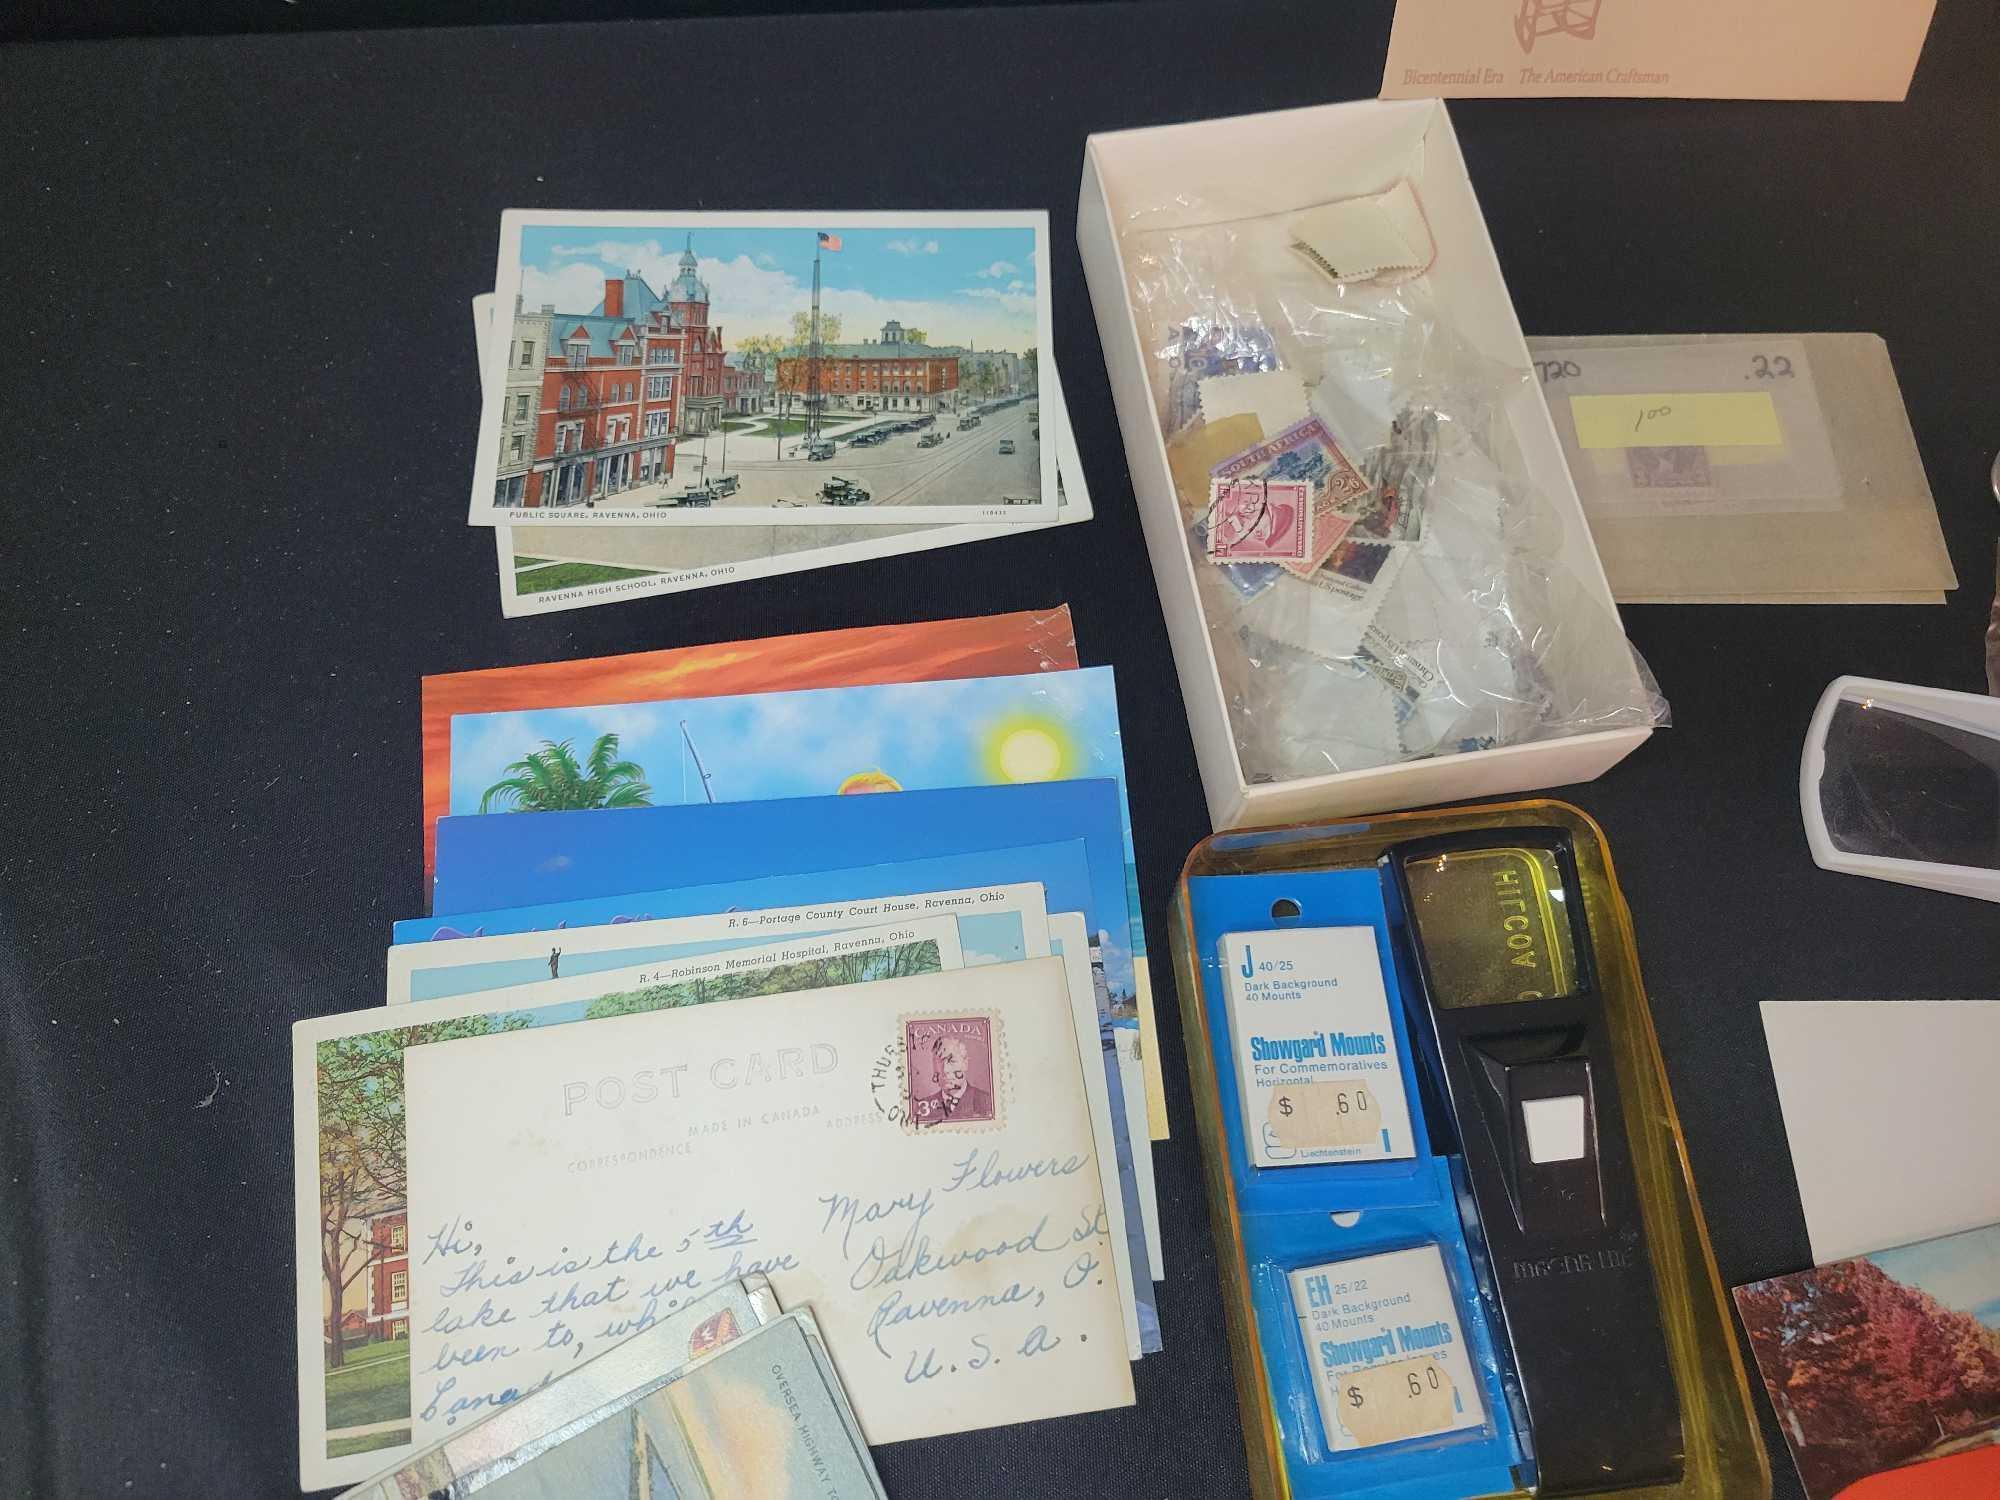 Unused postal cards, envelopes, loose stamps and some post cards